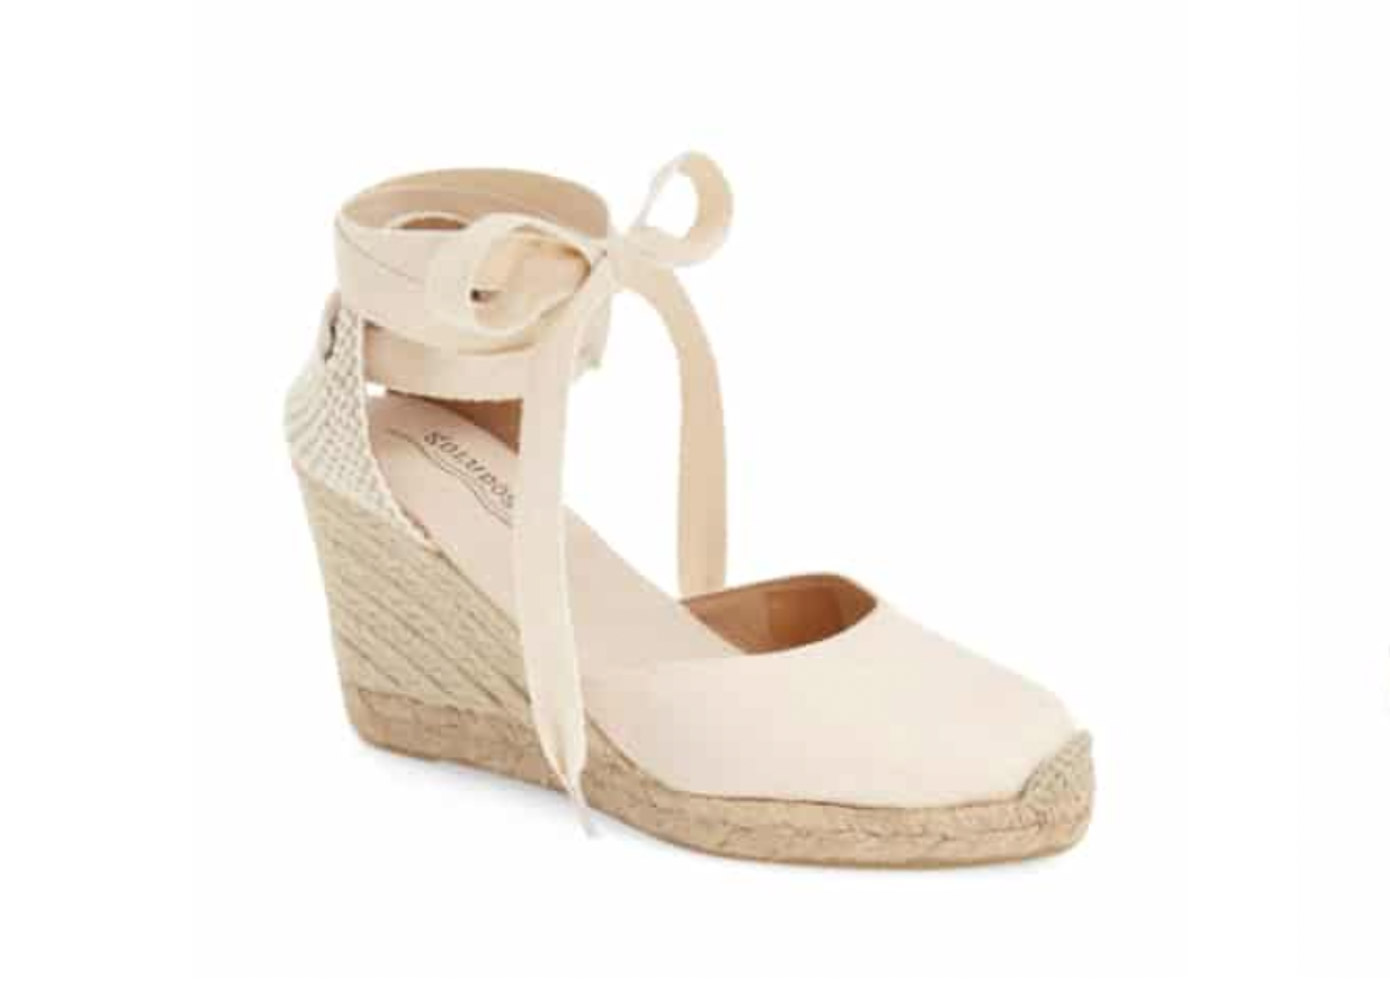 Laura Leigh of Louella Reese shares her favorite summer purchases of summer 2018 including these Soludos Espadrille Wedges